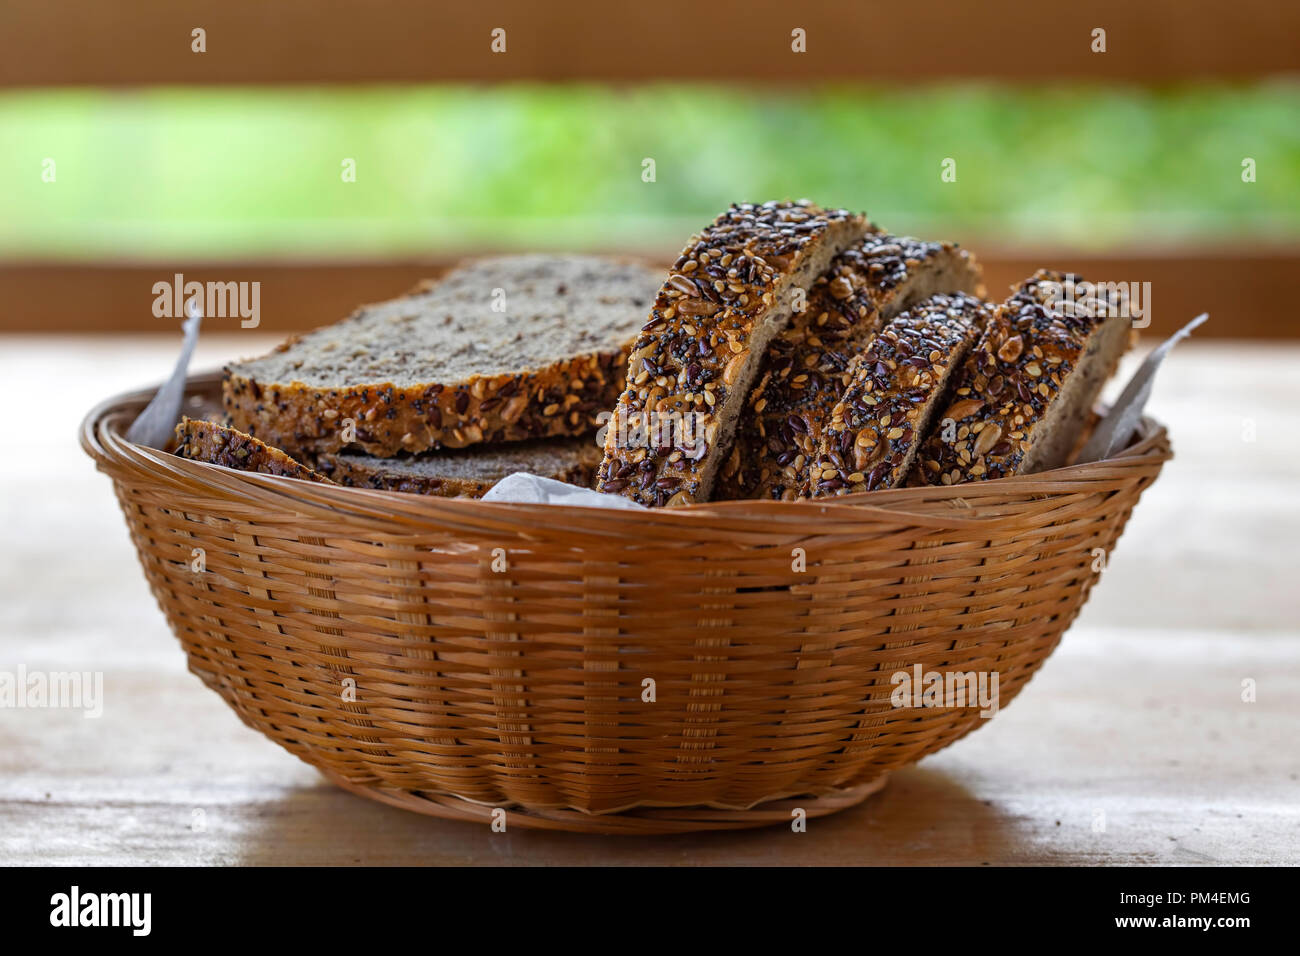 Basket with slices of bread with seeds on the table in summer season Stock Photo